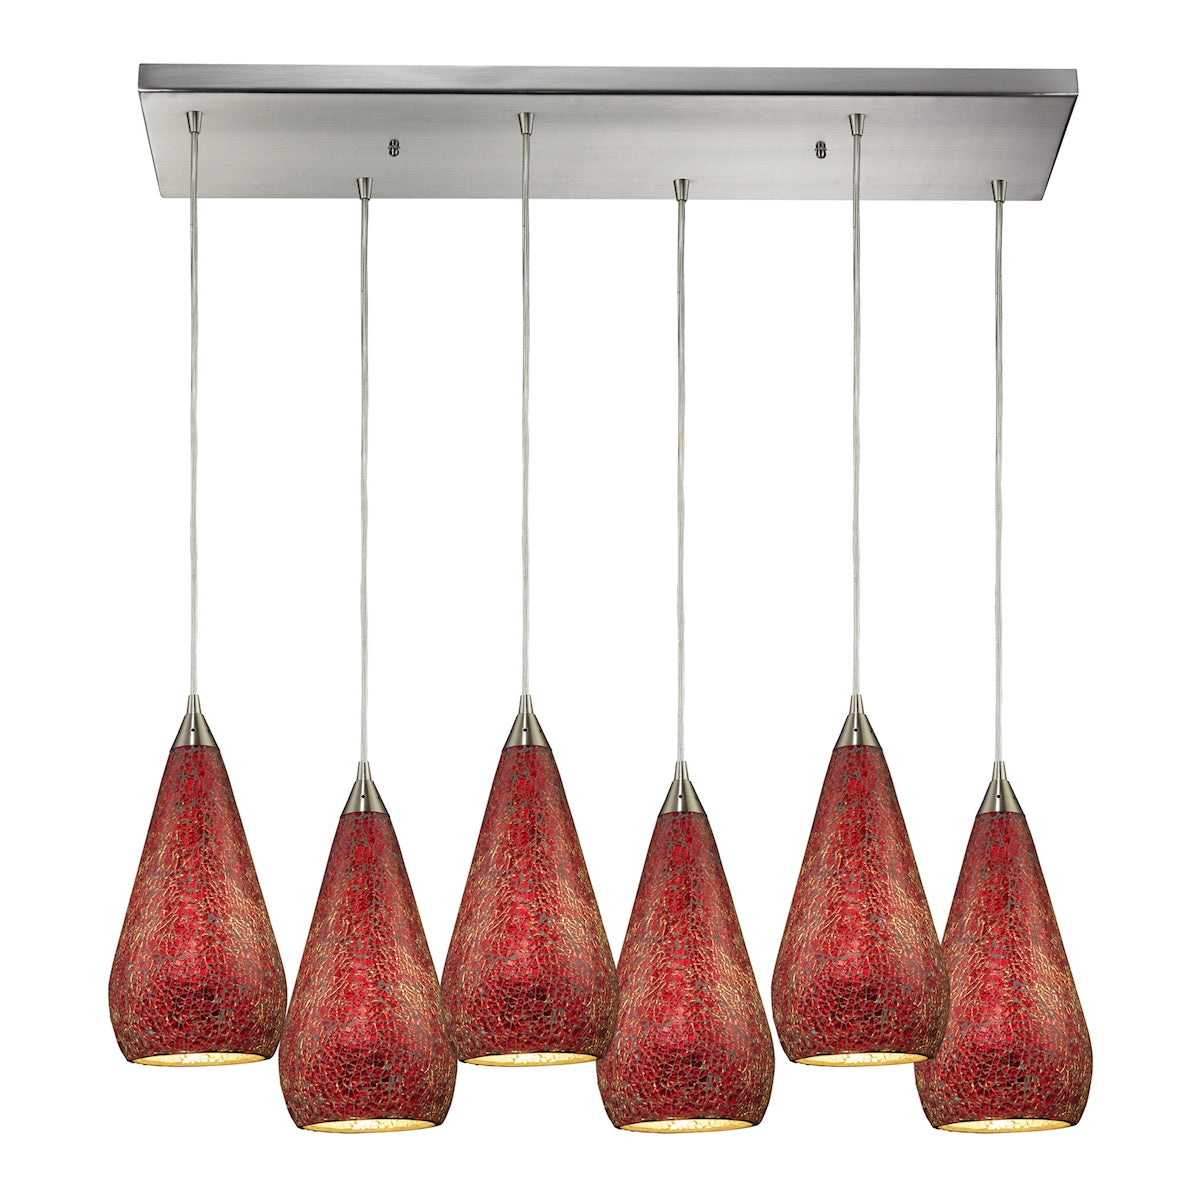 ELK Lighting 546-6RC-RBY-CRC Curvalo 6-Light Rectangular Pendant Fixture in Satin Nickel with Ruby Crackle Glass